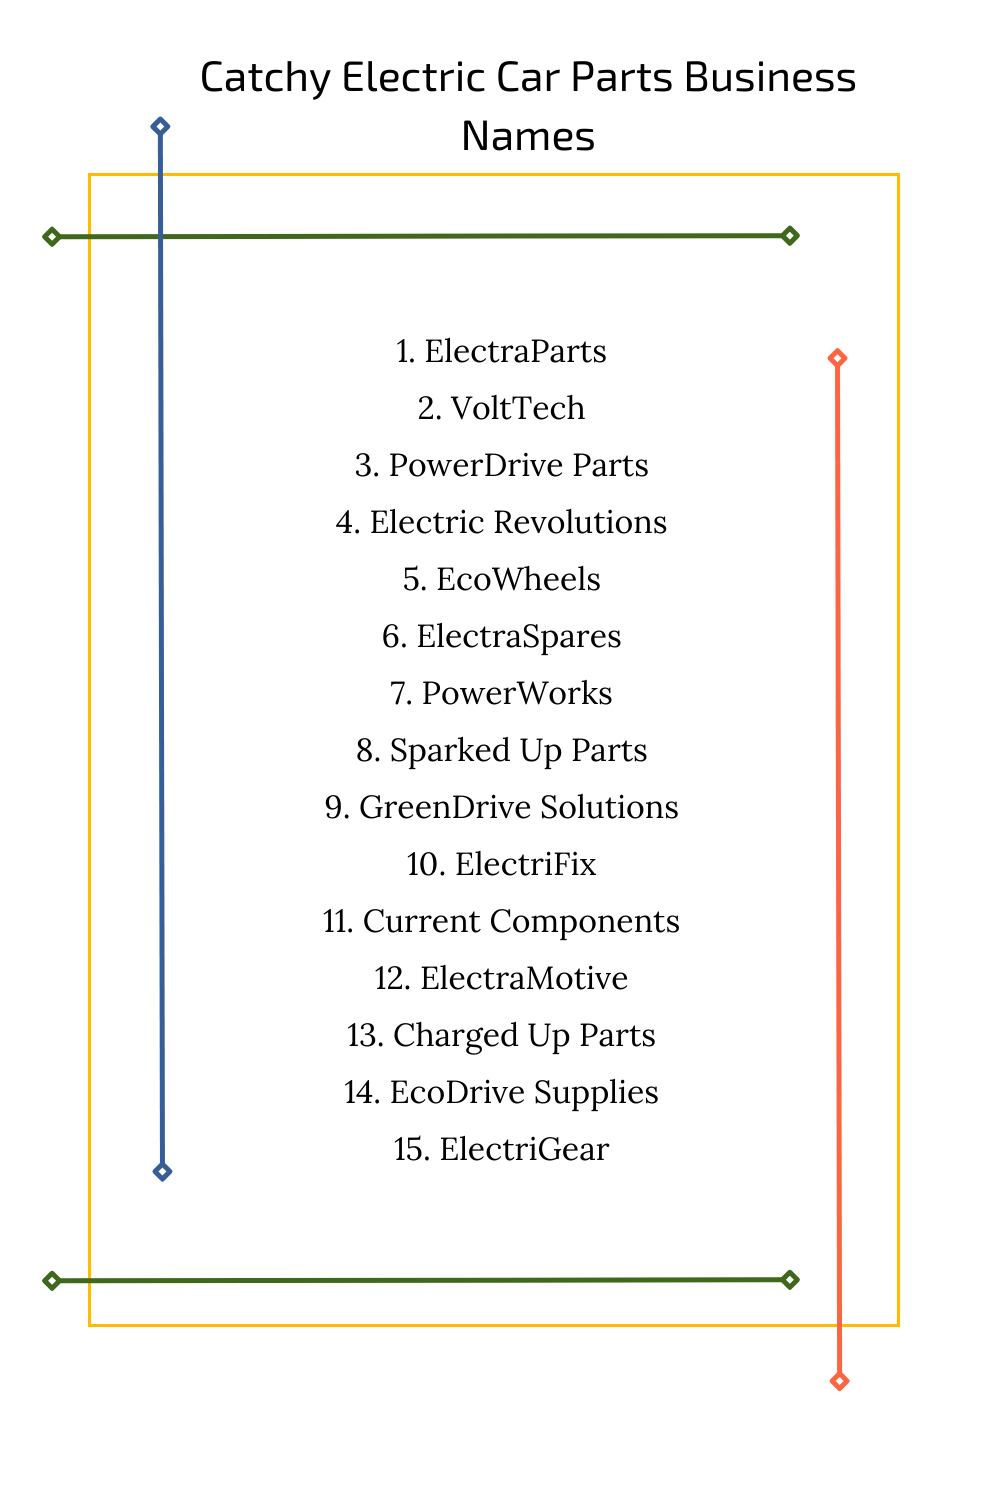 Catchy Electric Car Parts Business Names